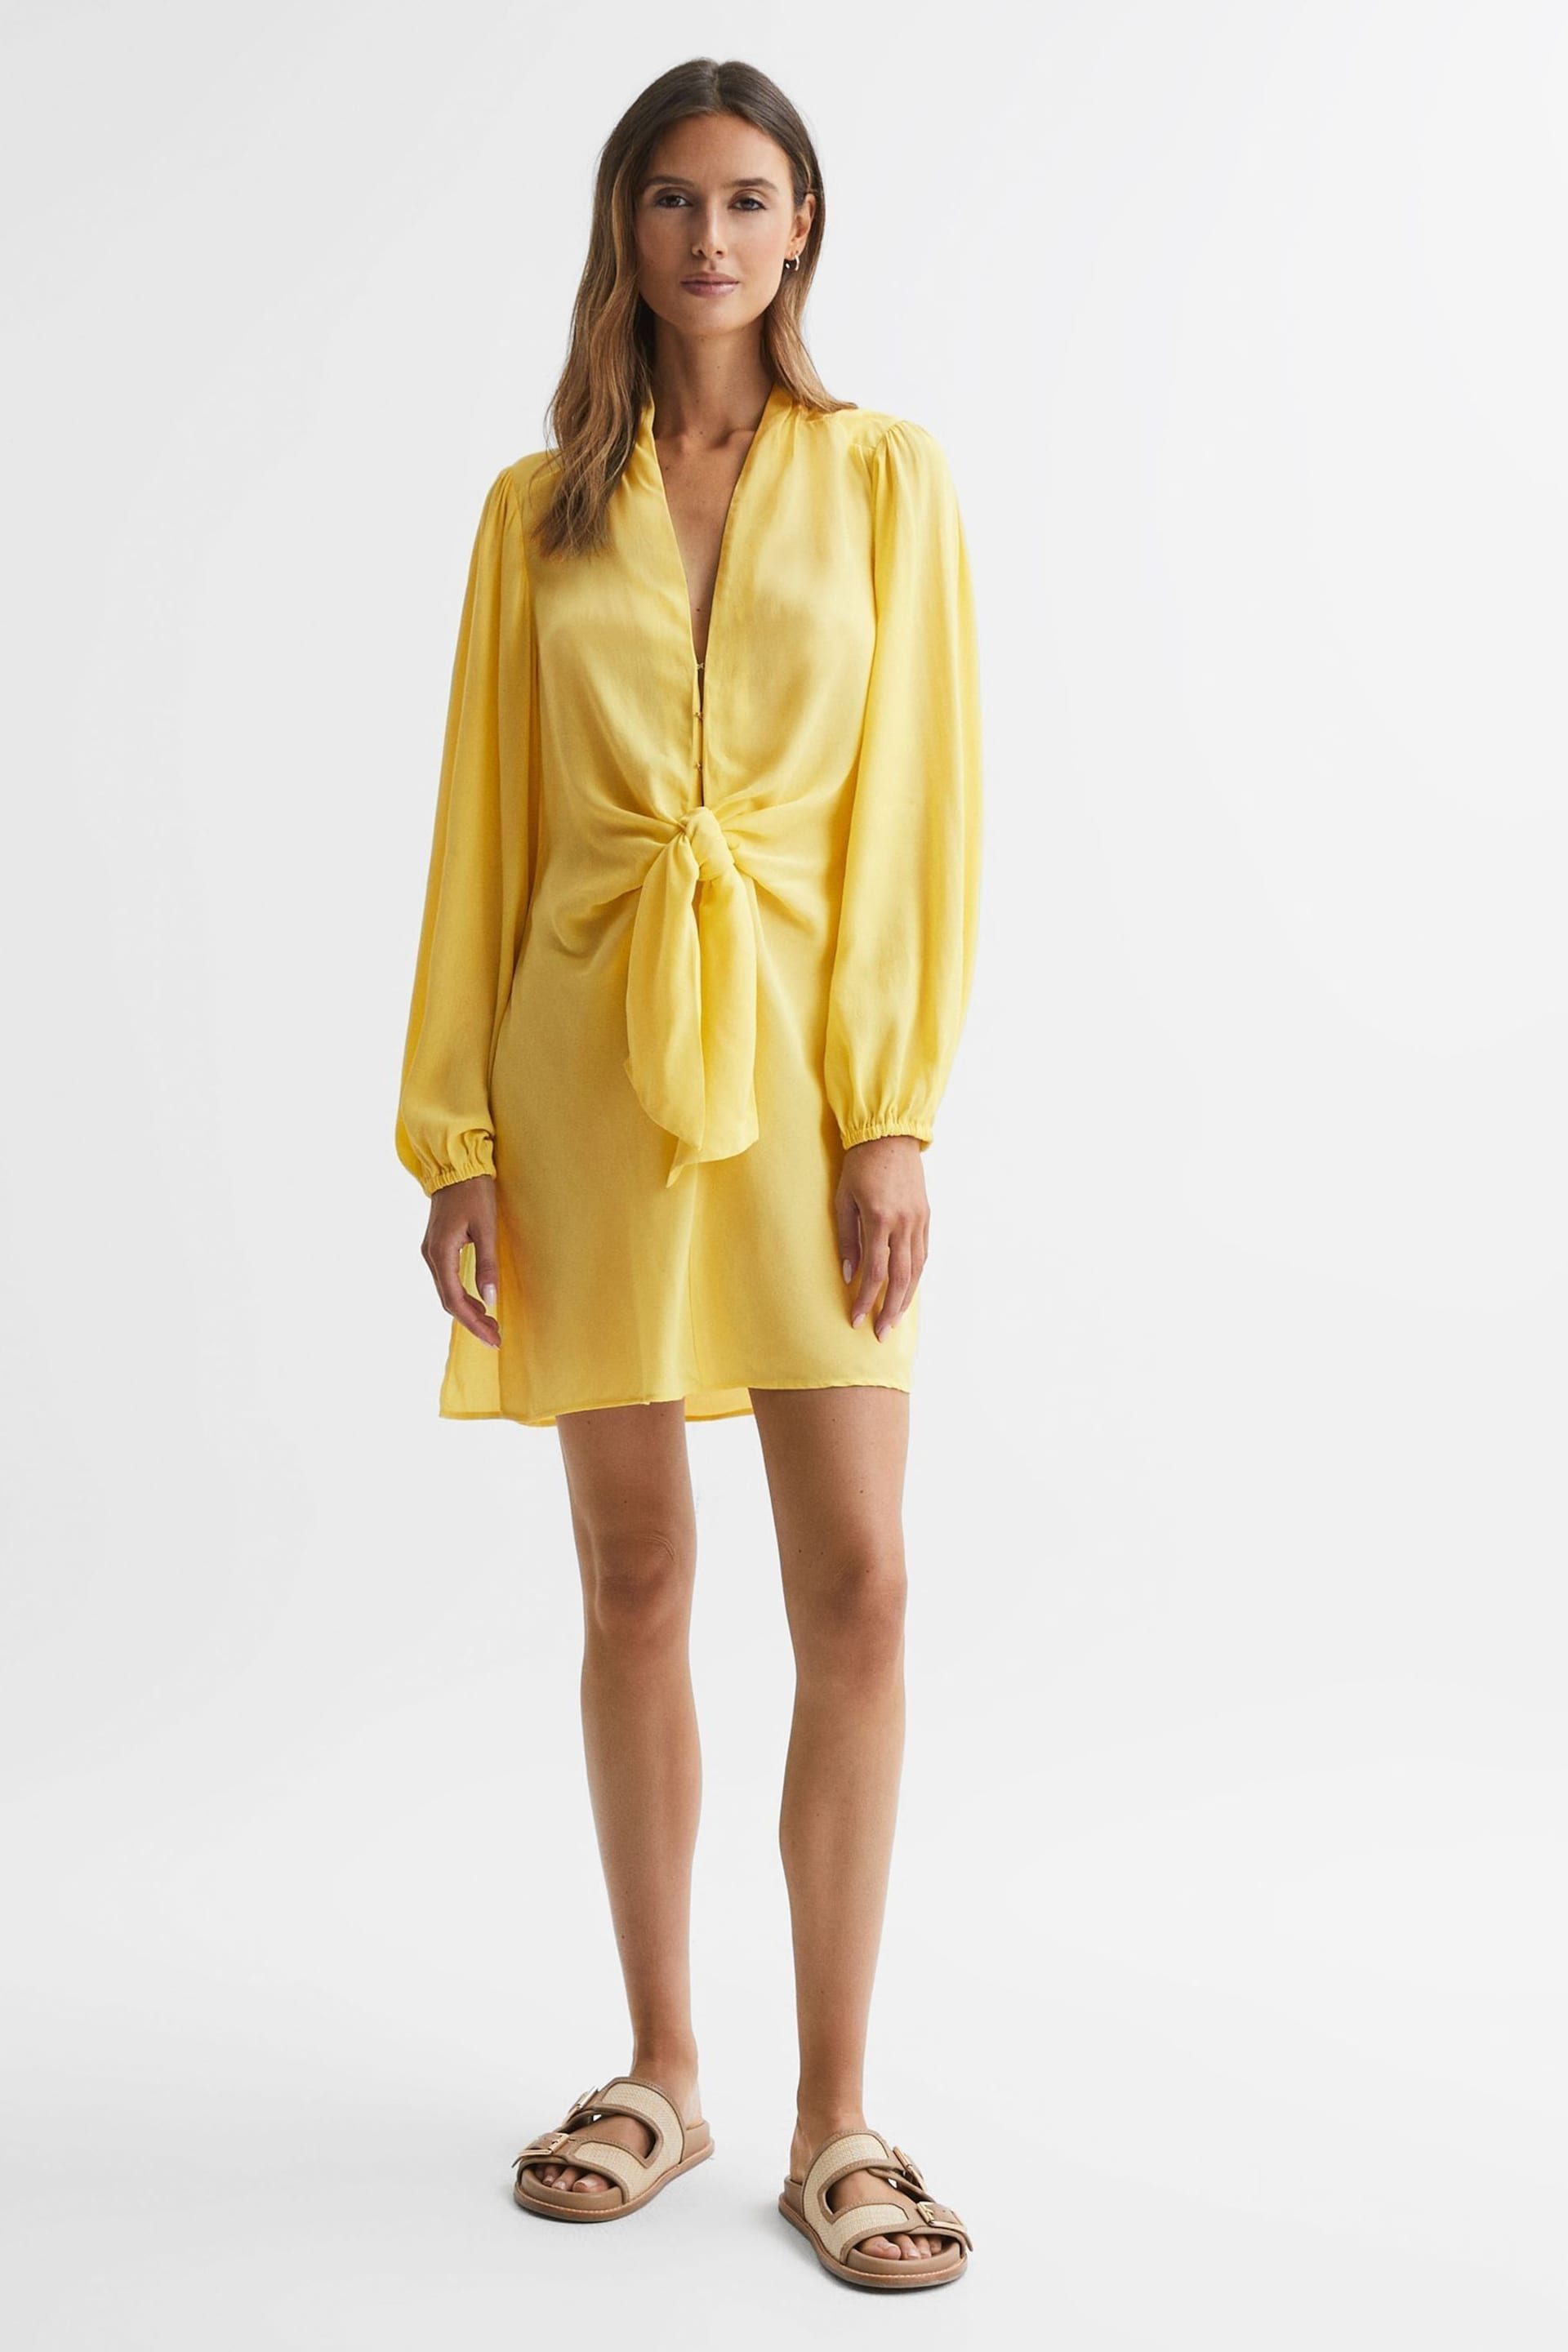 Reiss Yellow Mabel Tie Front Mini Dress - Image 3 of 5